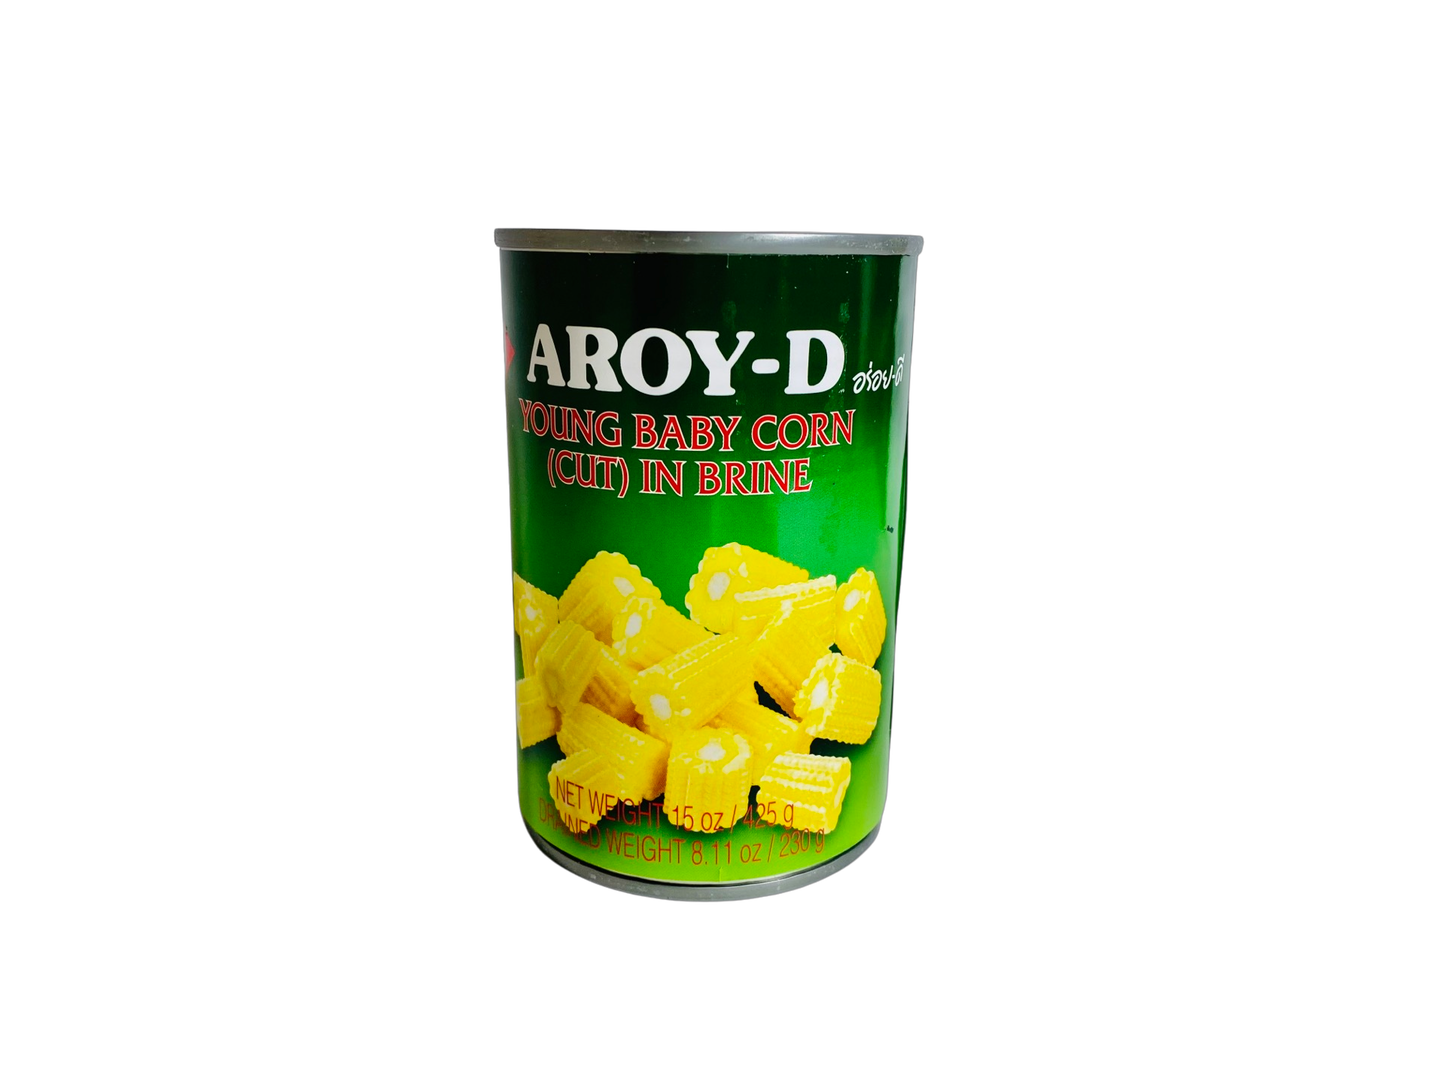 Aroy-D Young Baby Corn (Cut) In Brine 425g